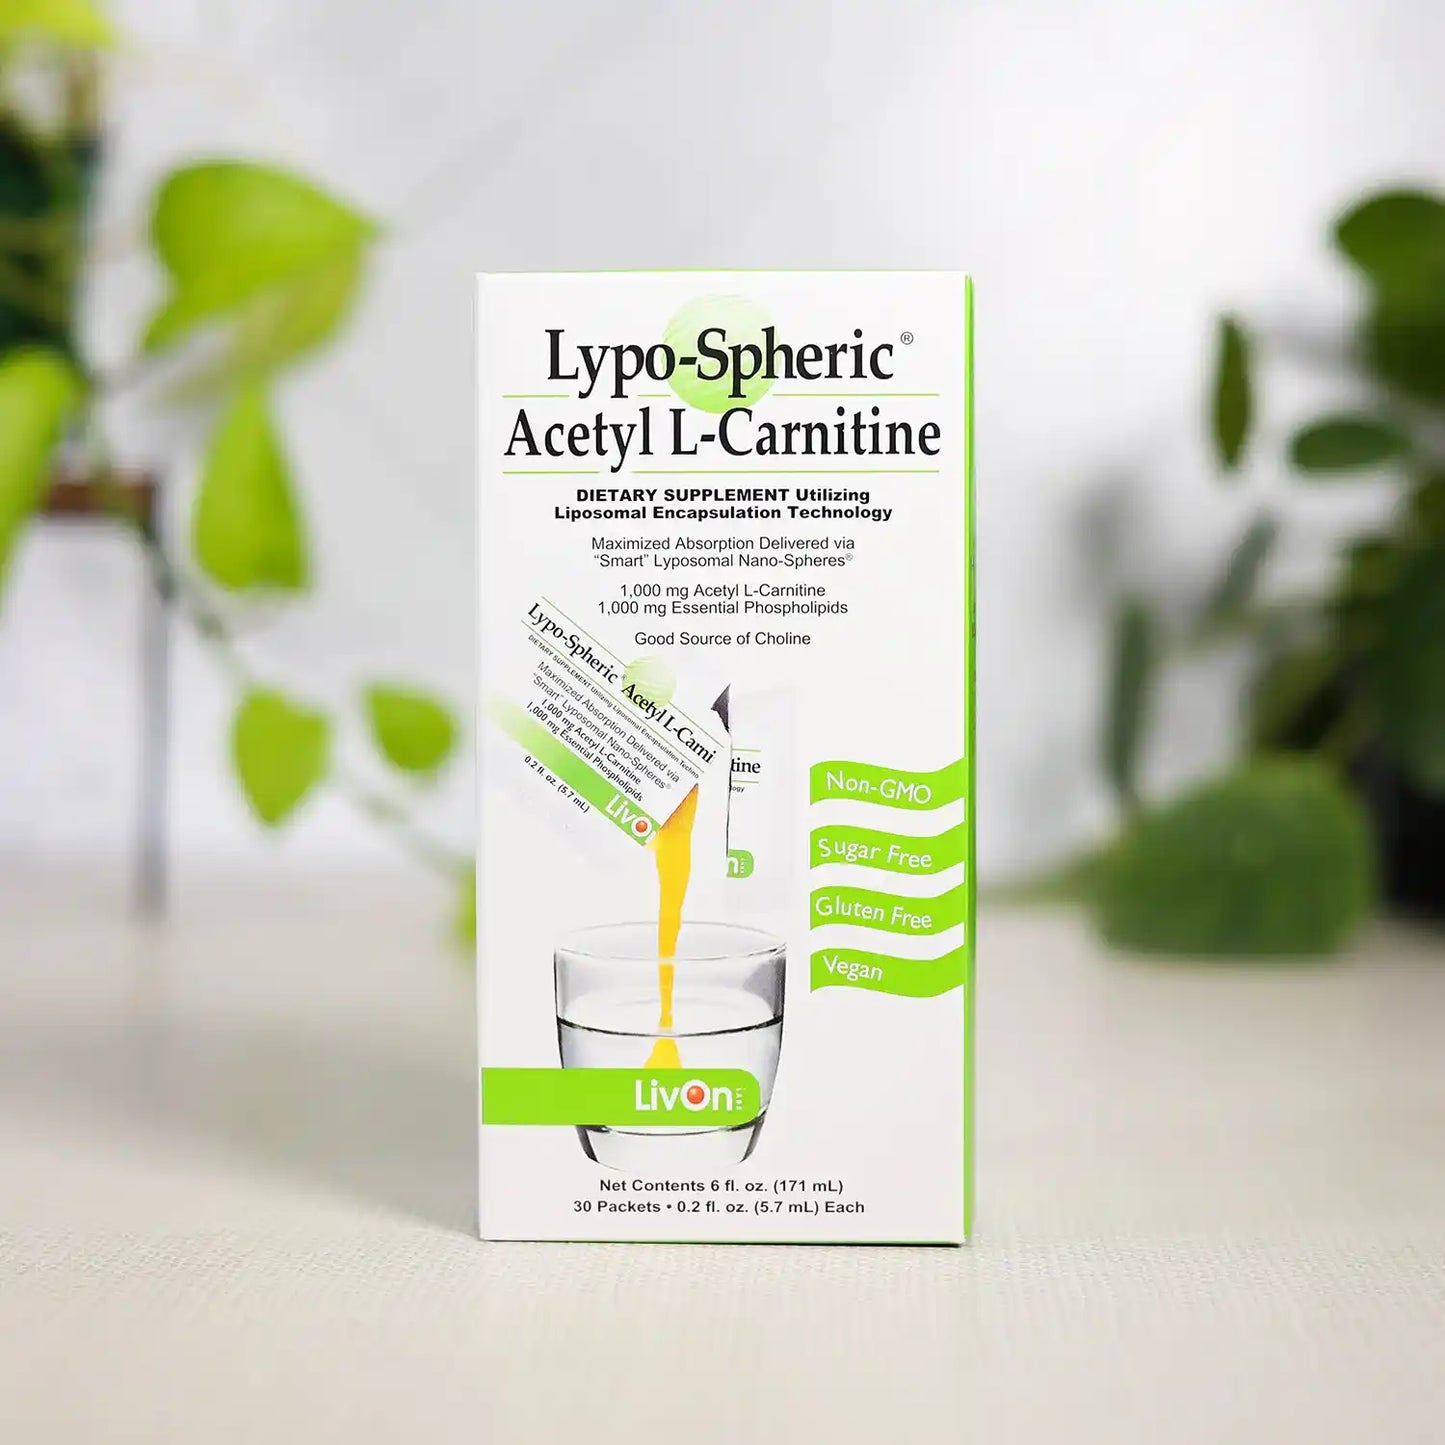 Lypo-Spheric Acetyl L-Carnitine carton with plants in background